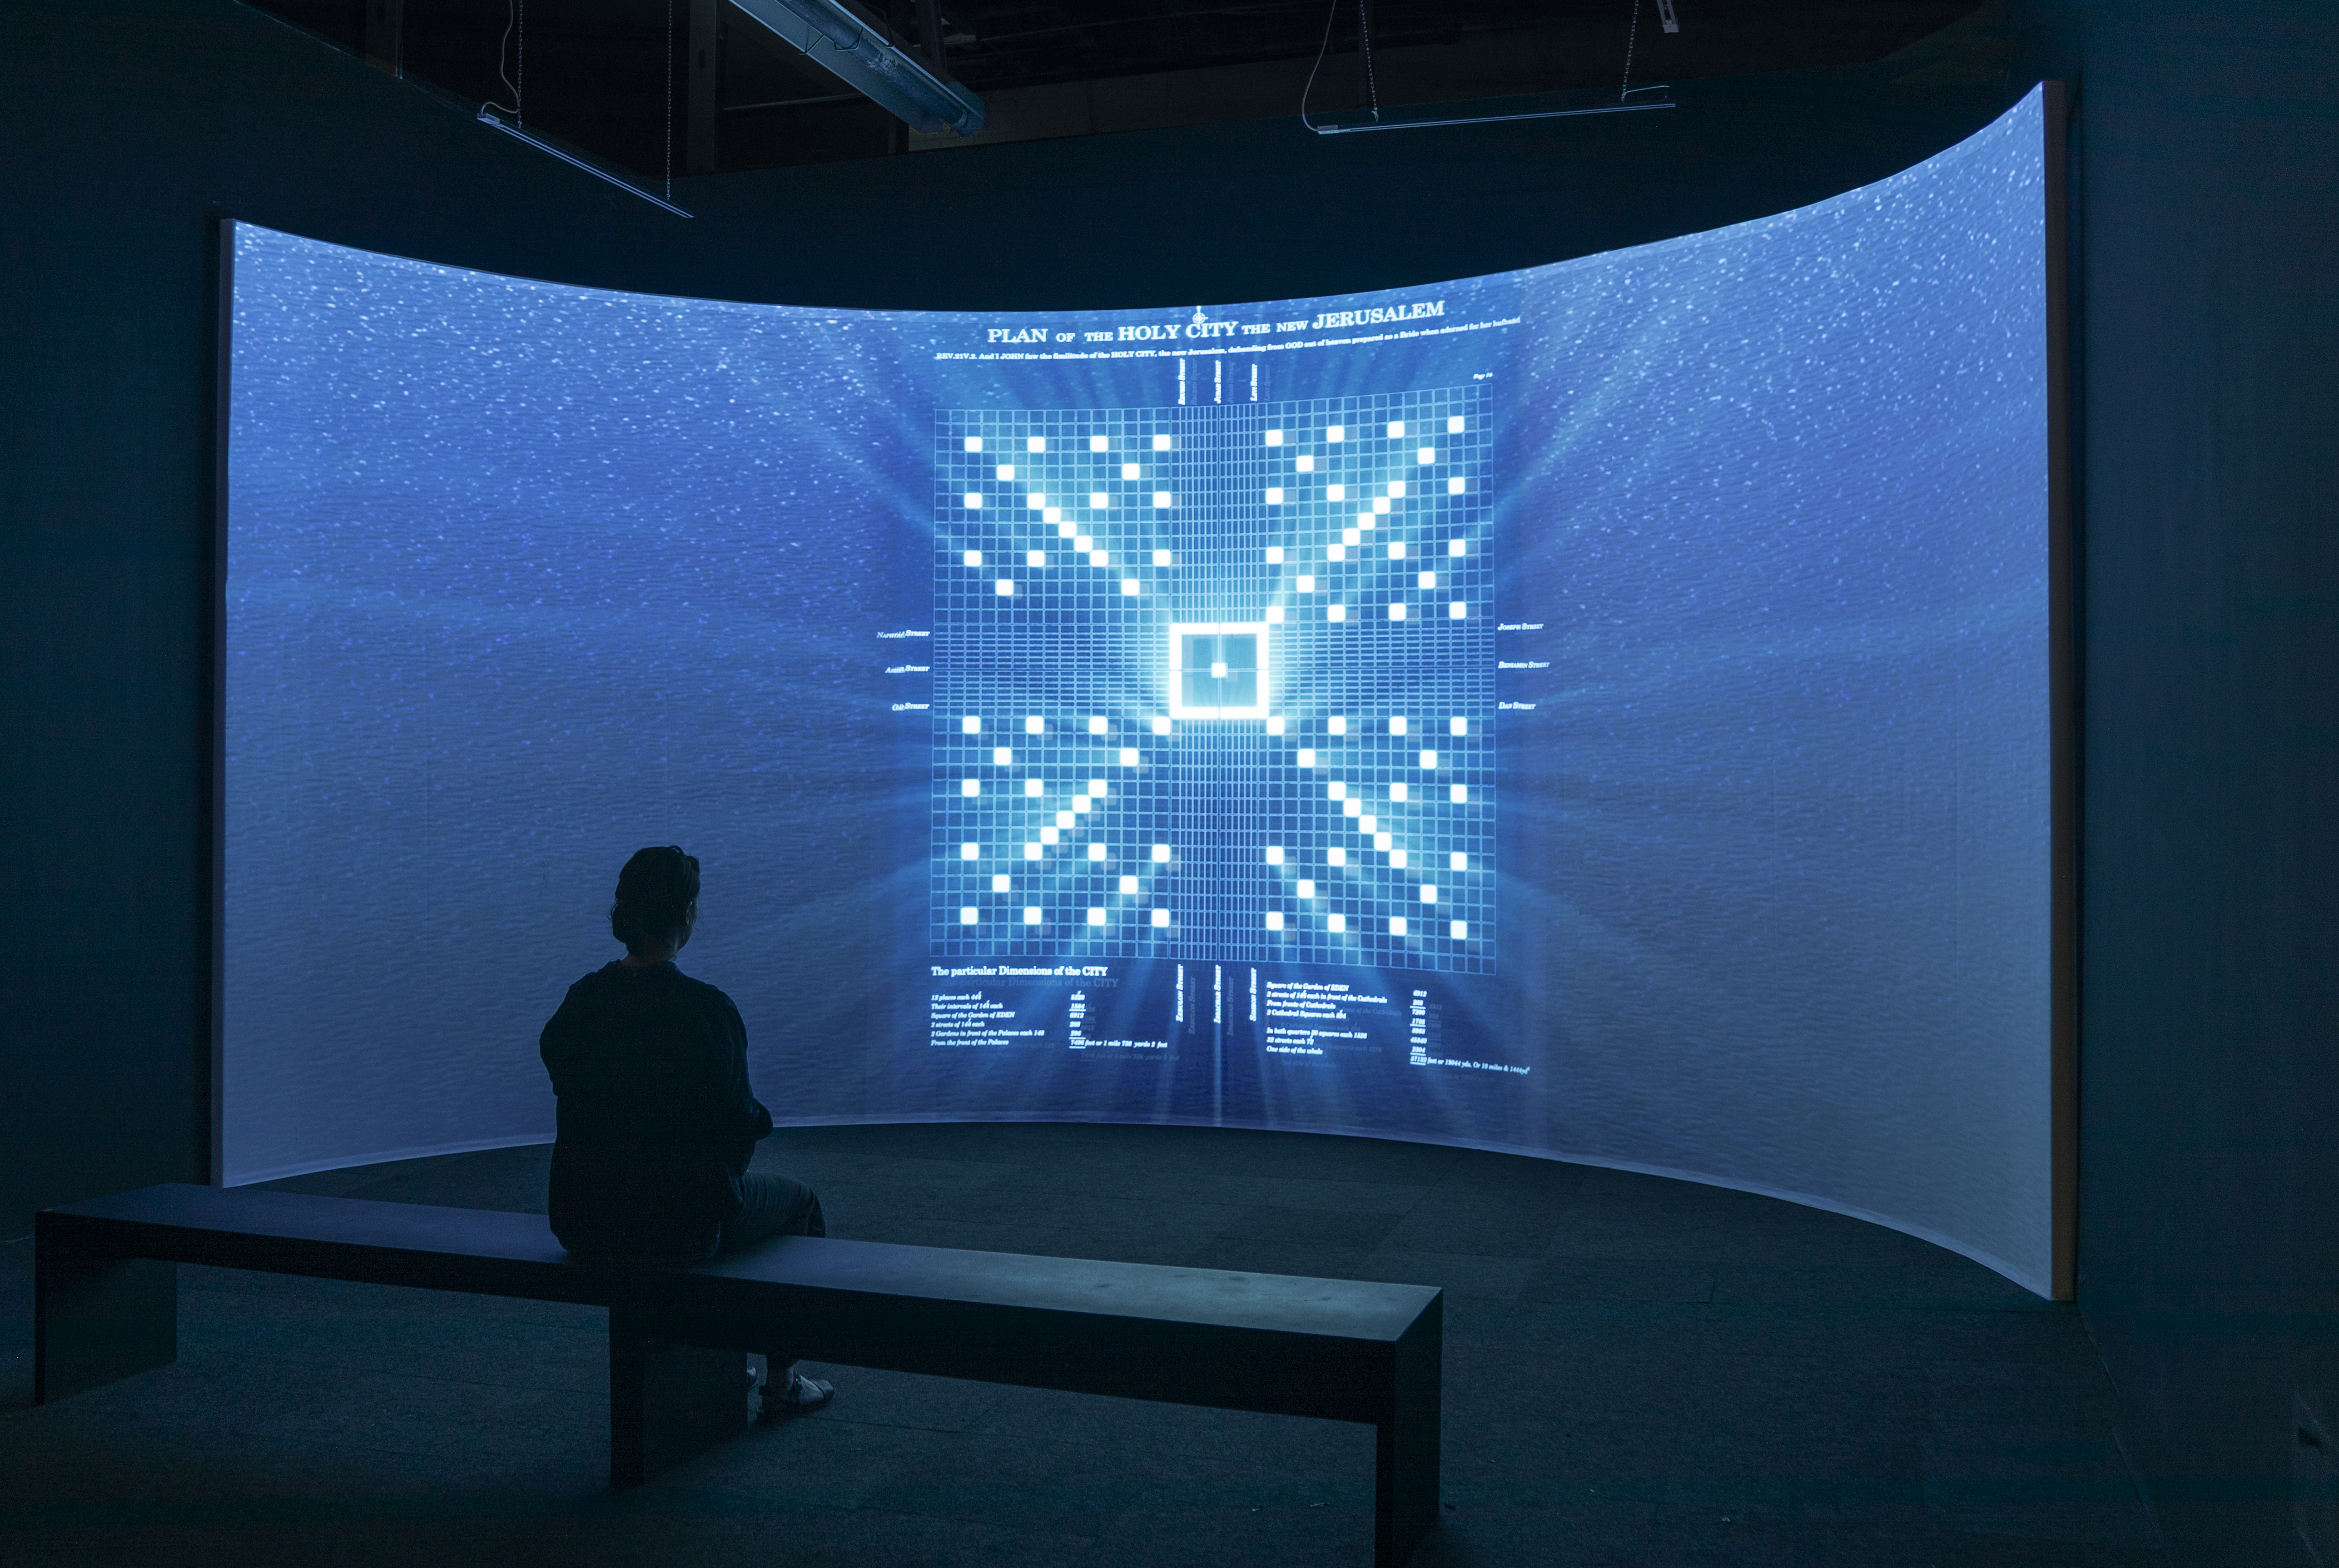 Installation shot of a darkened space with a 180-degree curved screen with a projected image from Un-charting. A viewer sits on a bench in front of the screen with an image of a glowing whitye map against a blue water-like background depicting a 19th century map of Jerusalem by the self proclaimed British Prophet Richard Brothers.